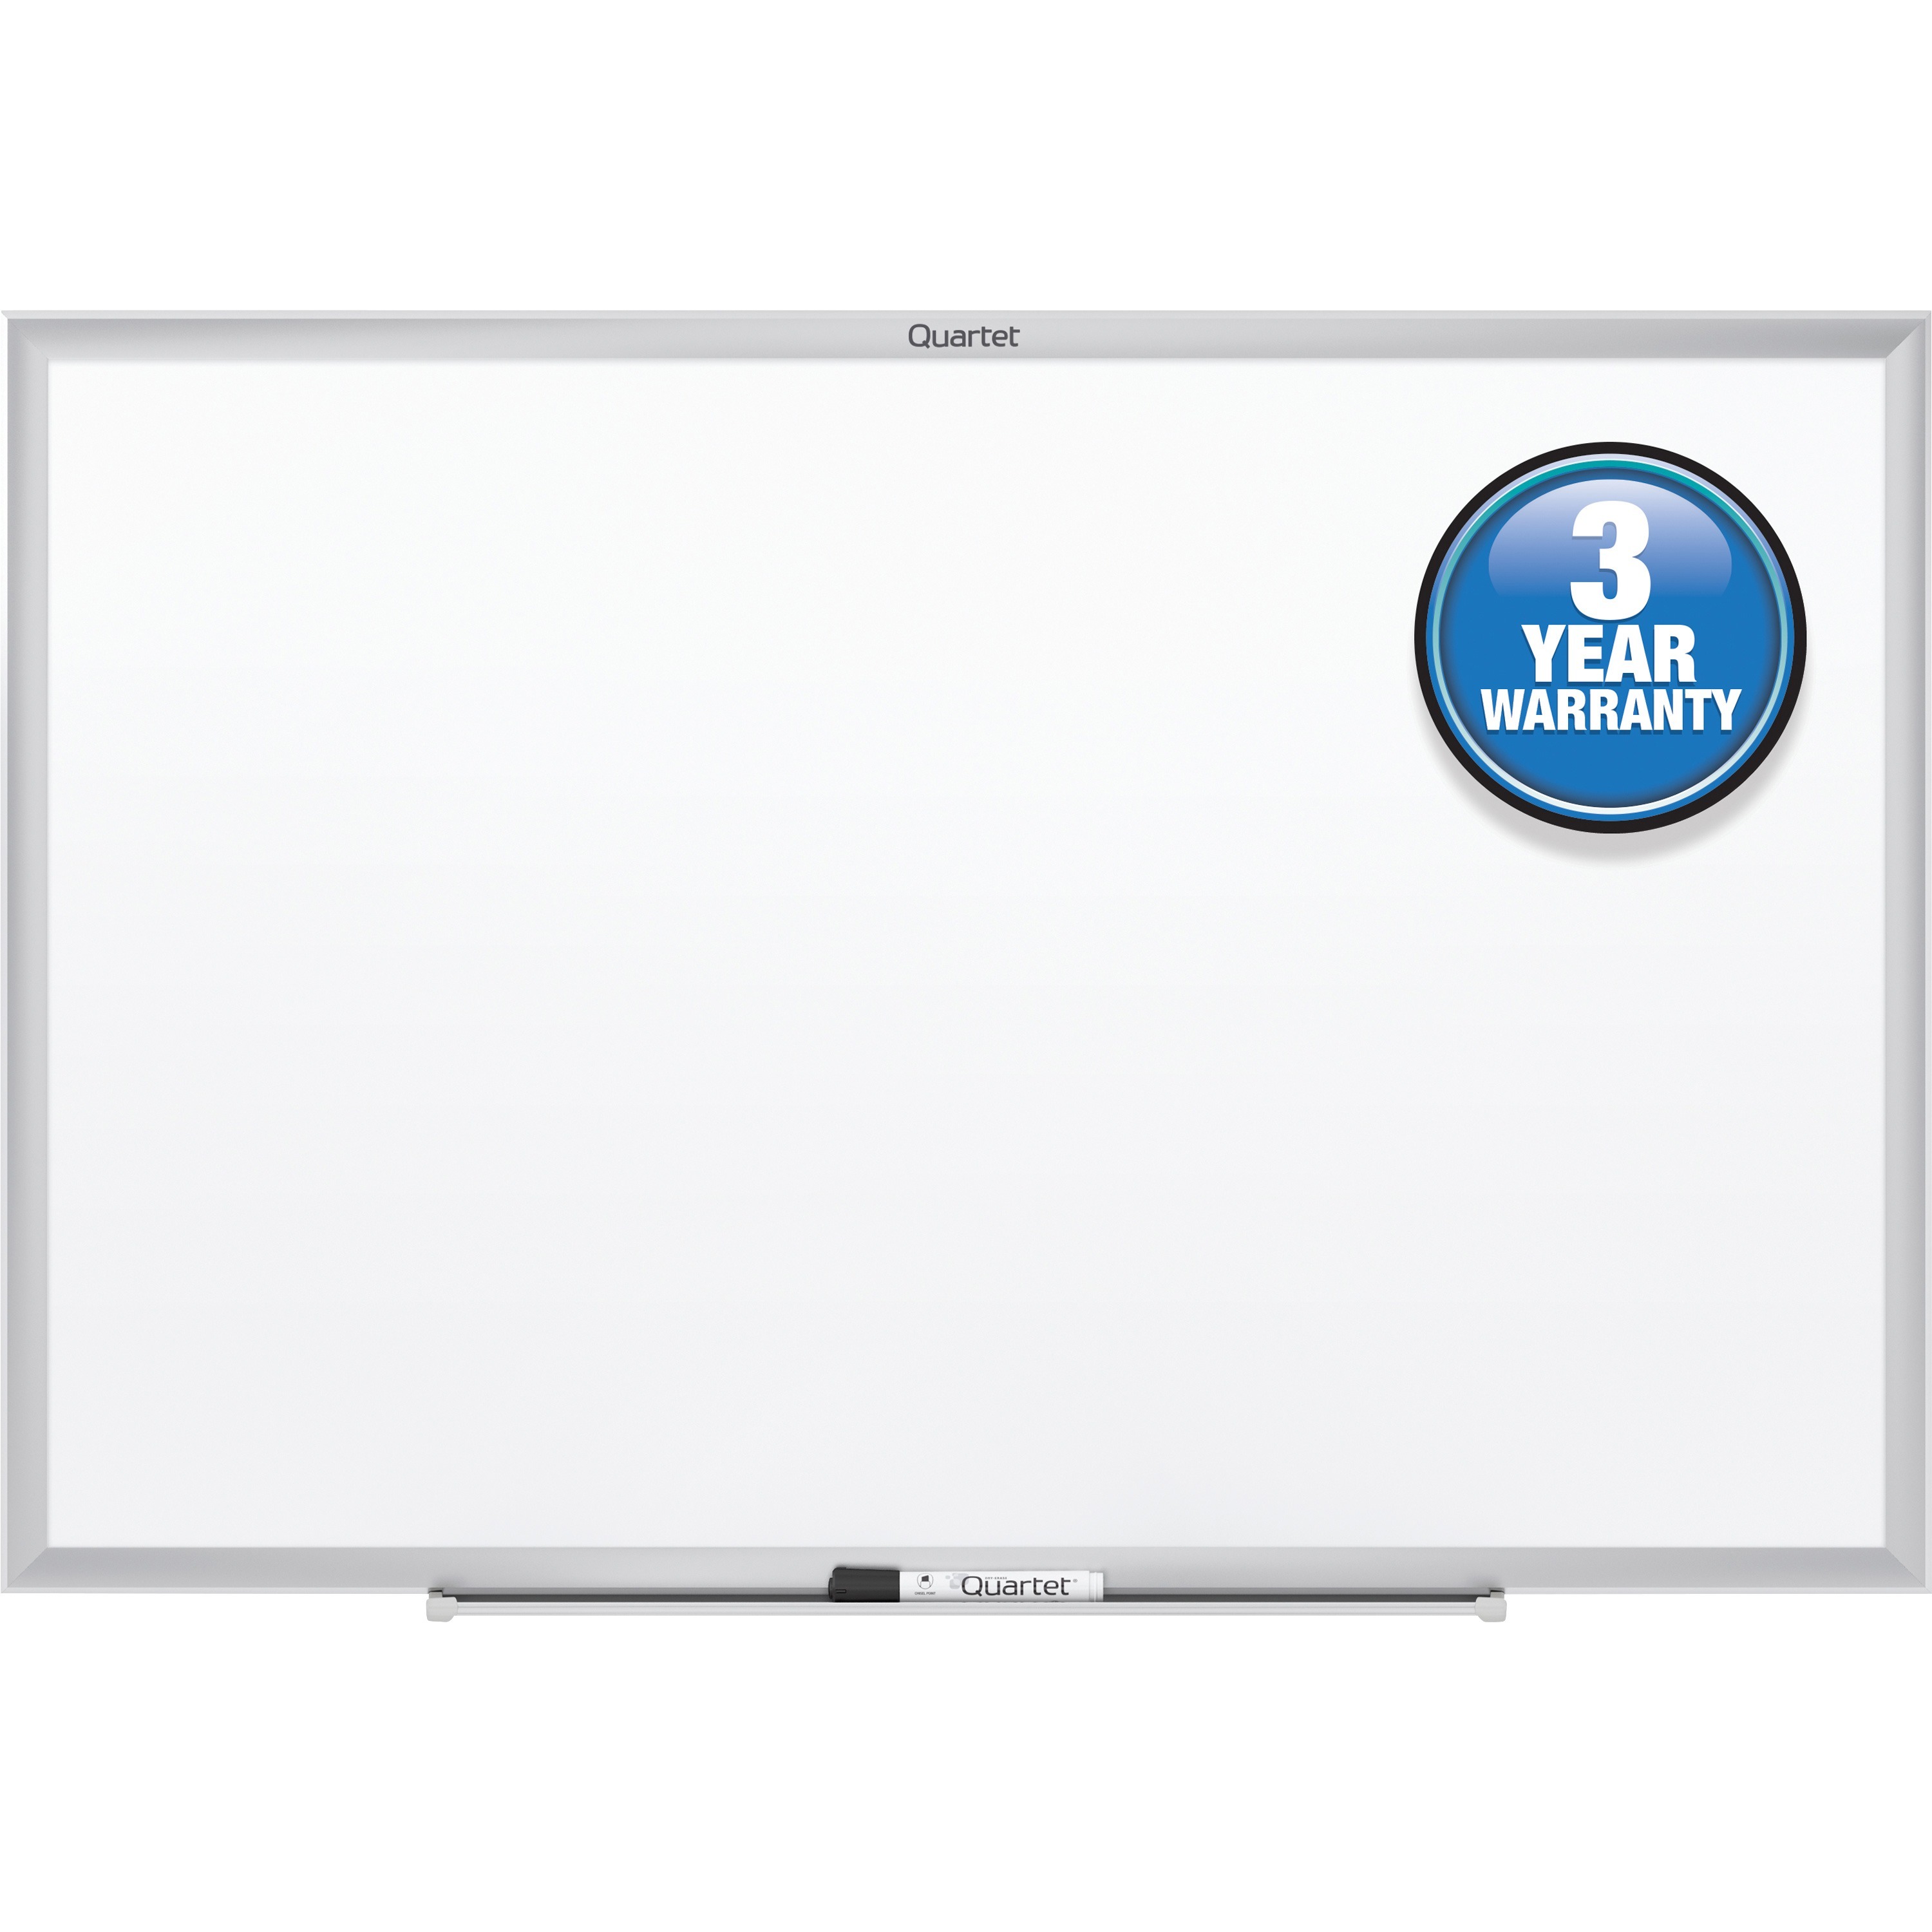 Ghent Dry Erase 4' x 3' Wood Frame Reversible Whiteboard Stand